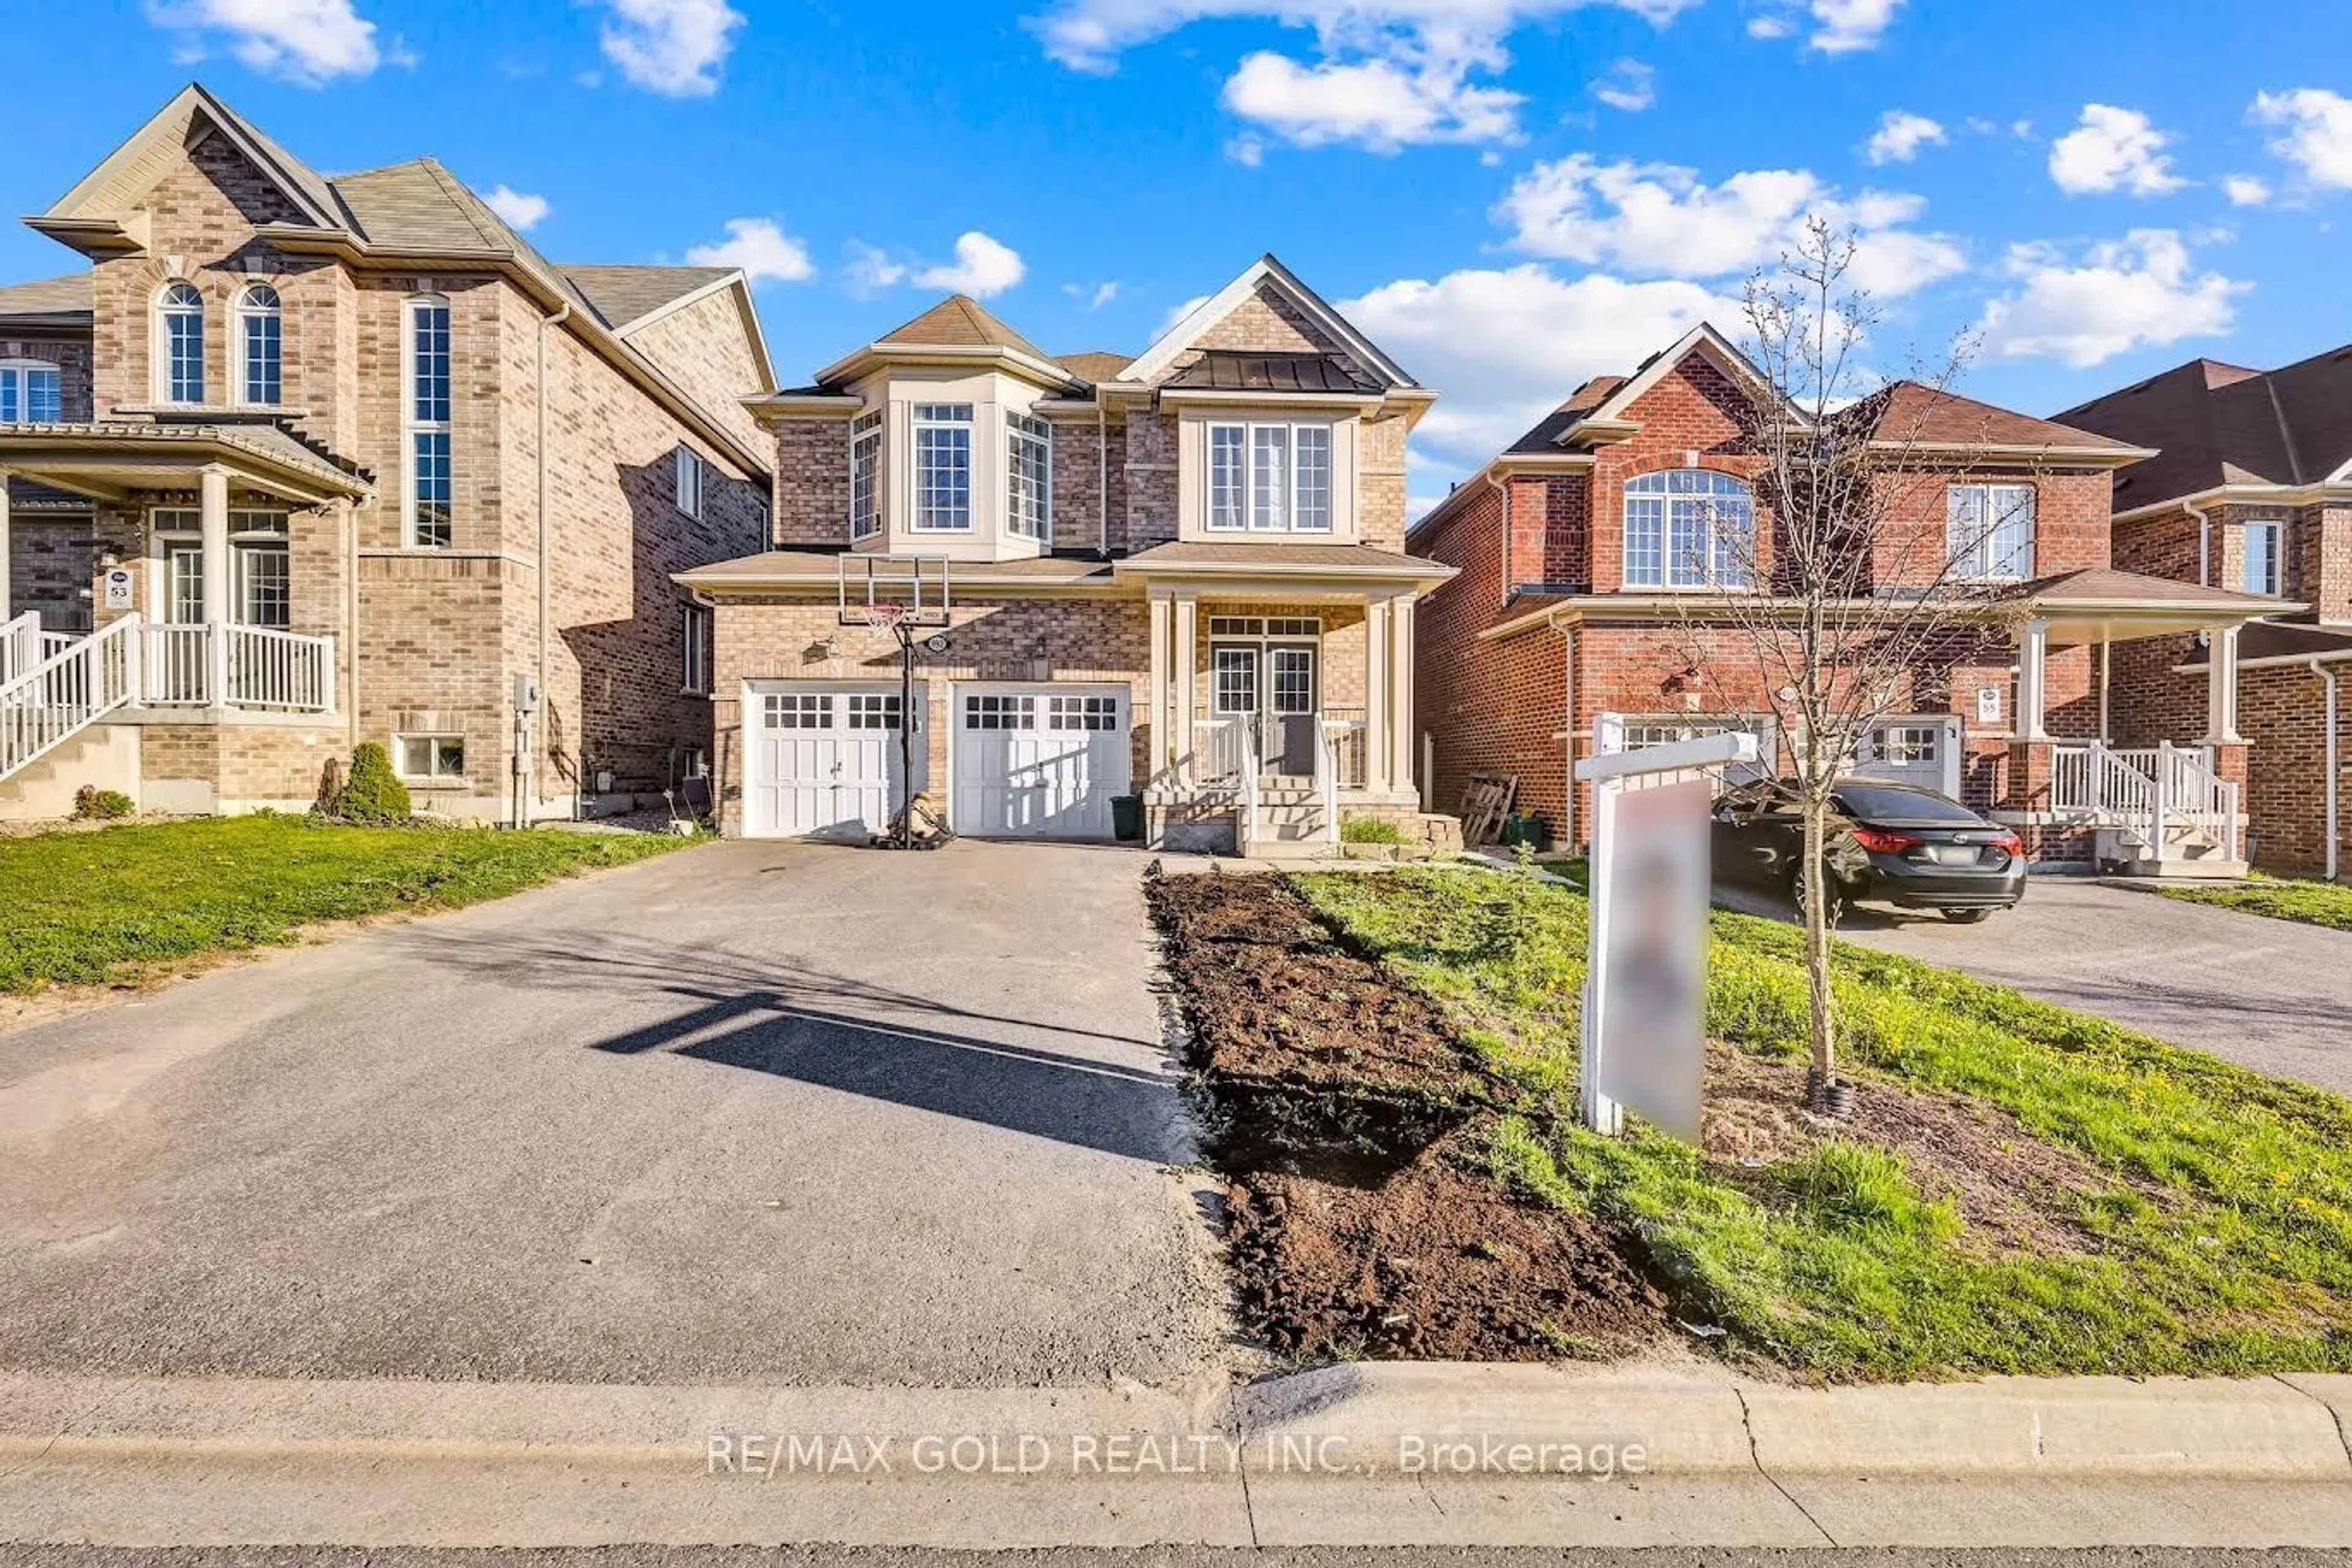 Home with brick exterior material for 992 Wrenwood Dr, Oshawa Ontario L1K 0Y1